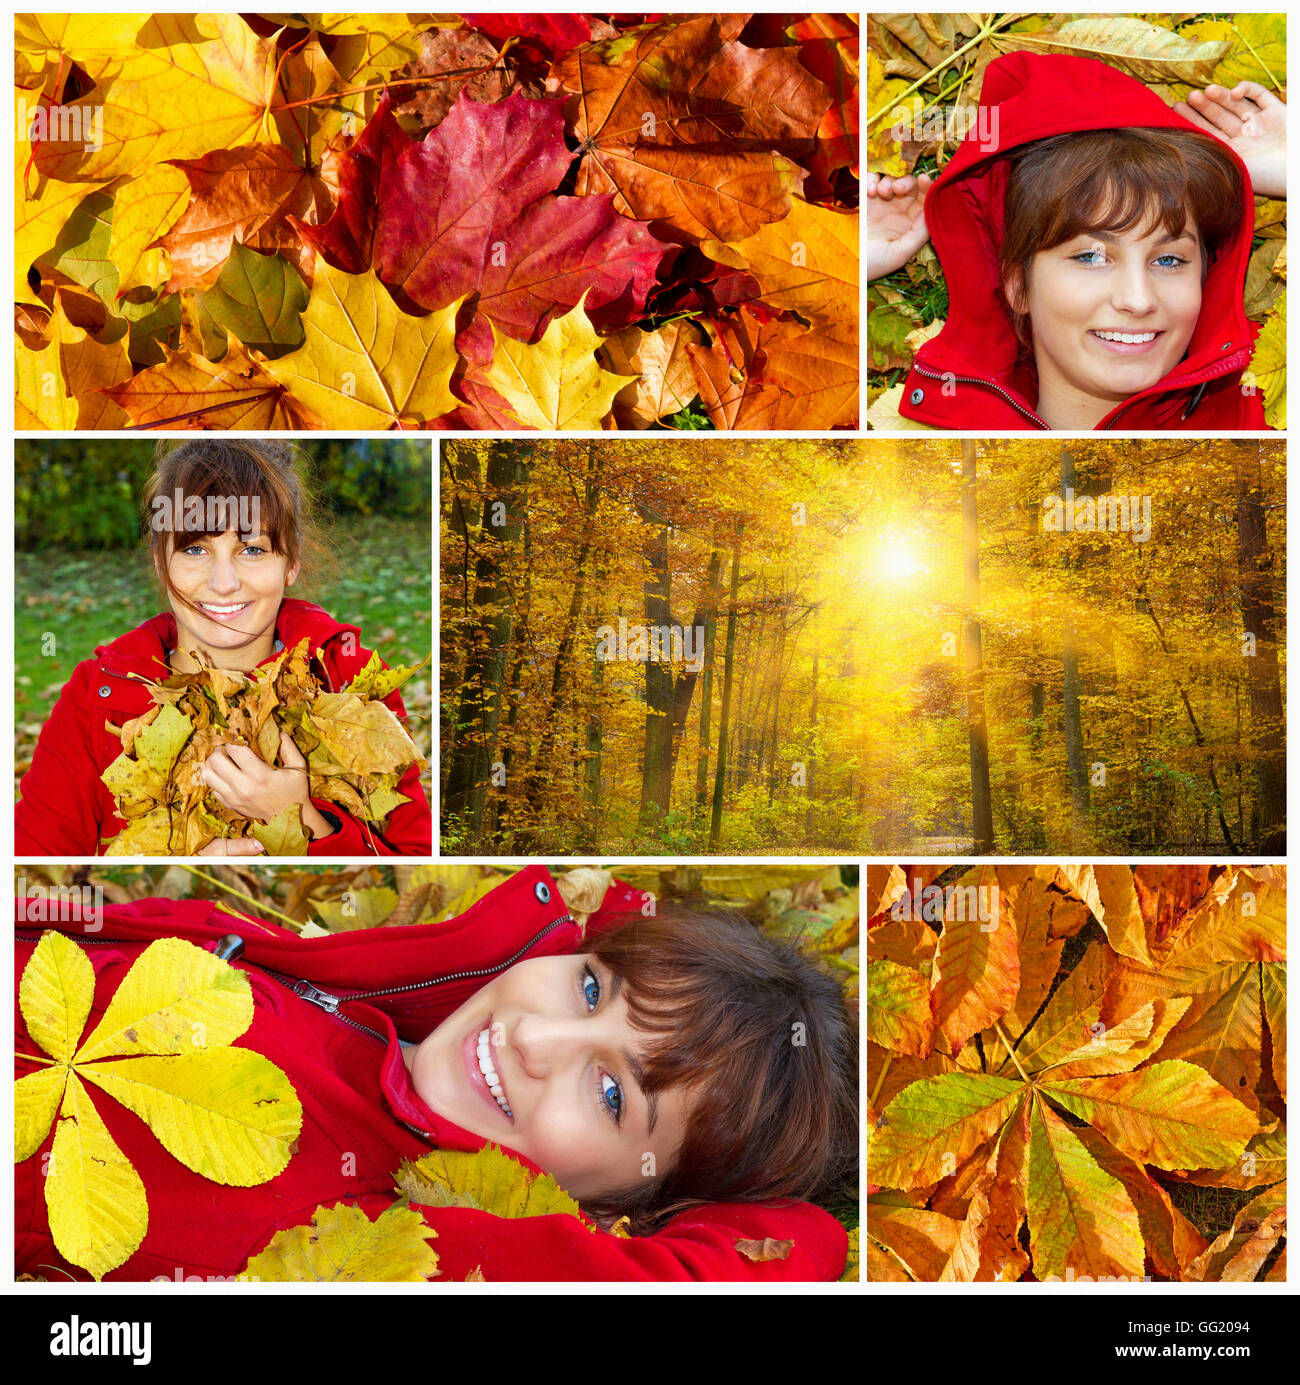 Collage of autumnal images with a young woiman Stock Photo